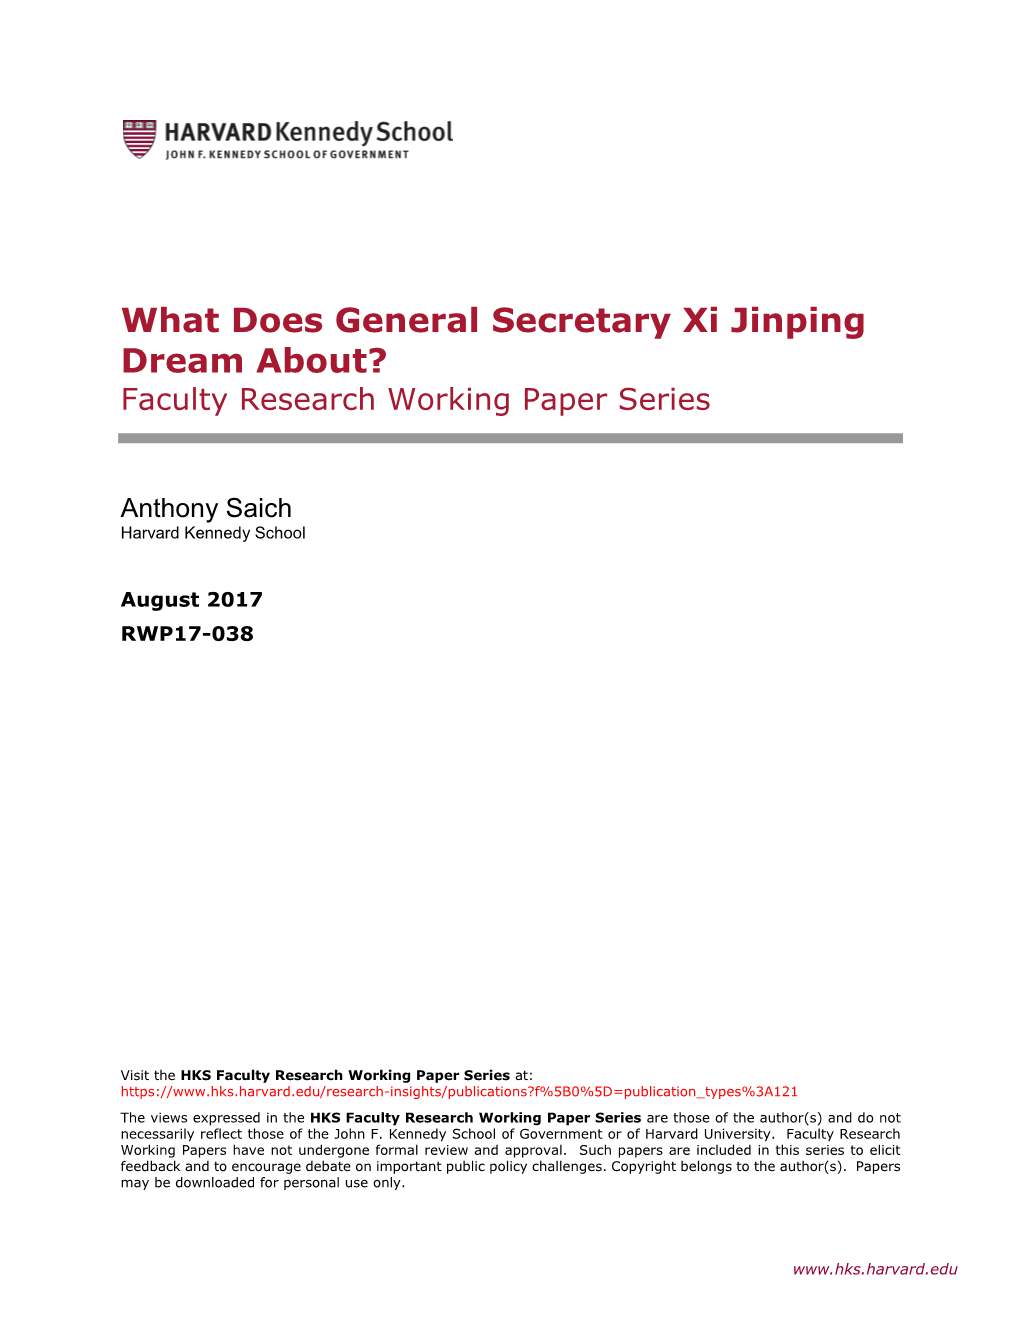 What Does General Secretary Xi Jinping Dream About? Faculty Research Working Paper Series